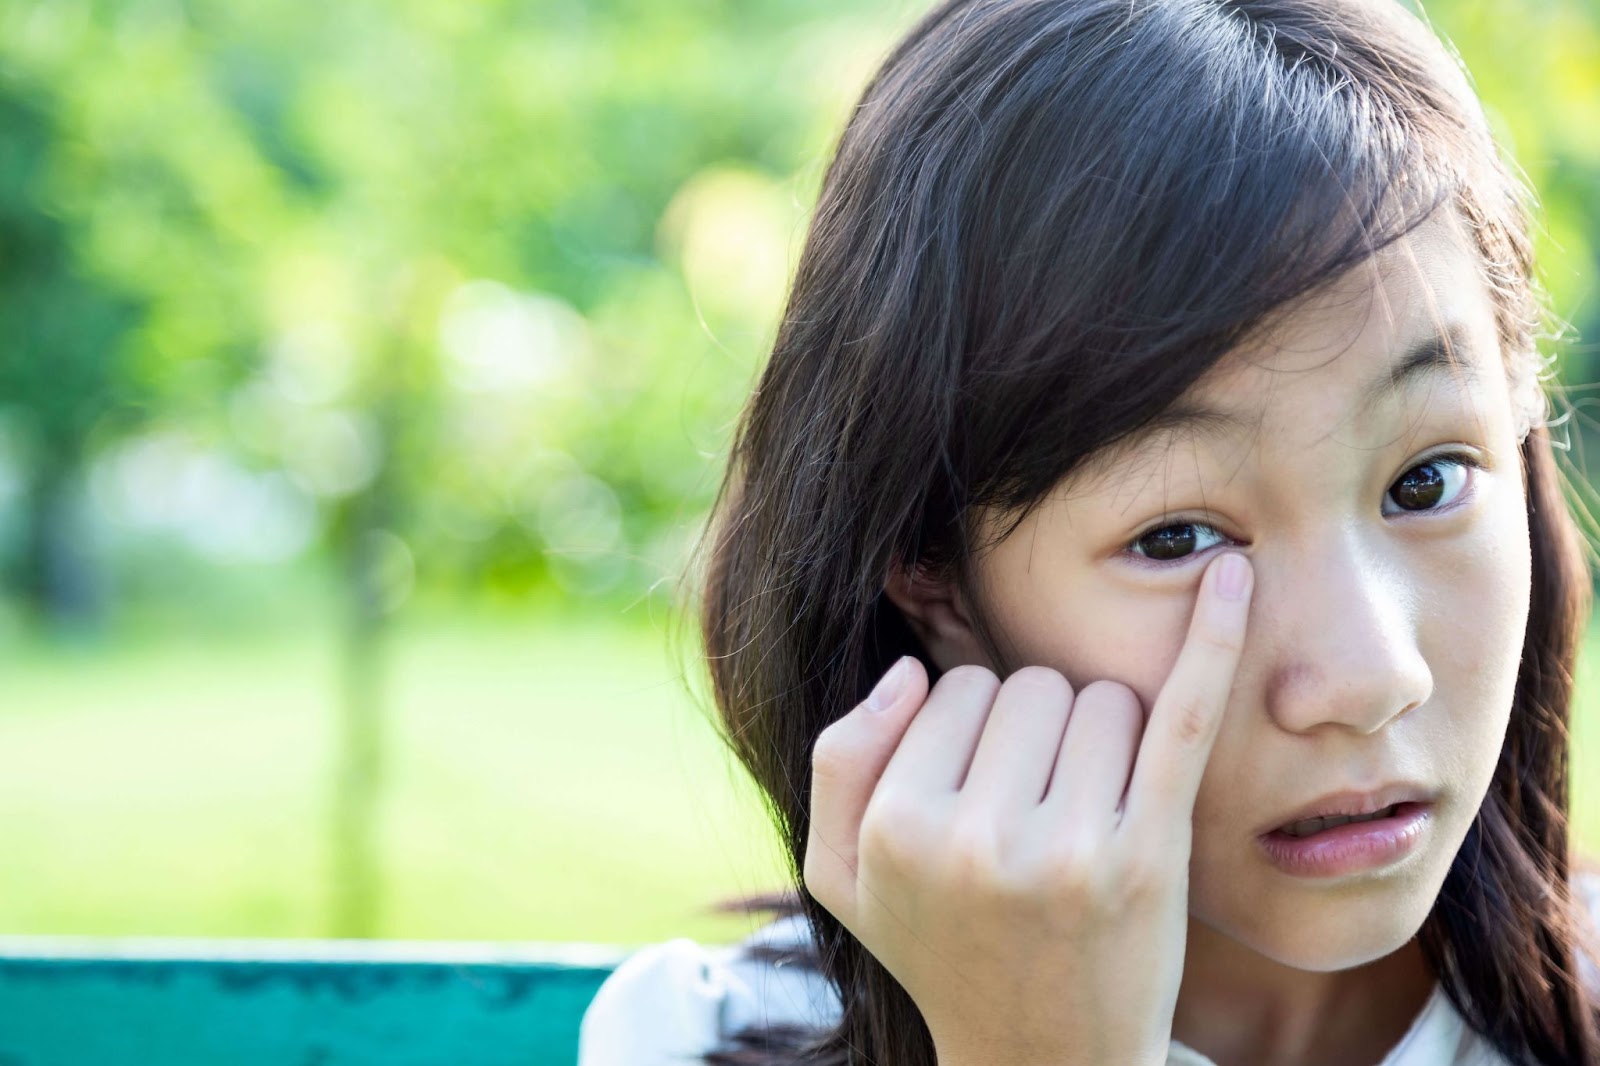 Close-up of a young girl outside rubbing her right eye with her right pinky finger